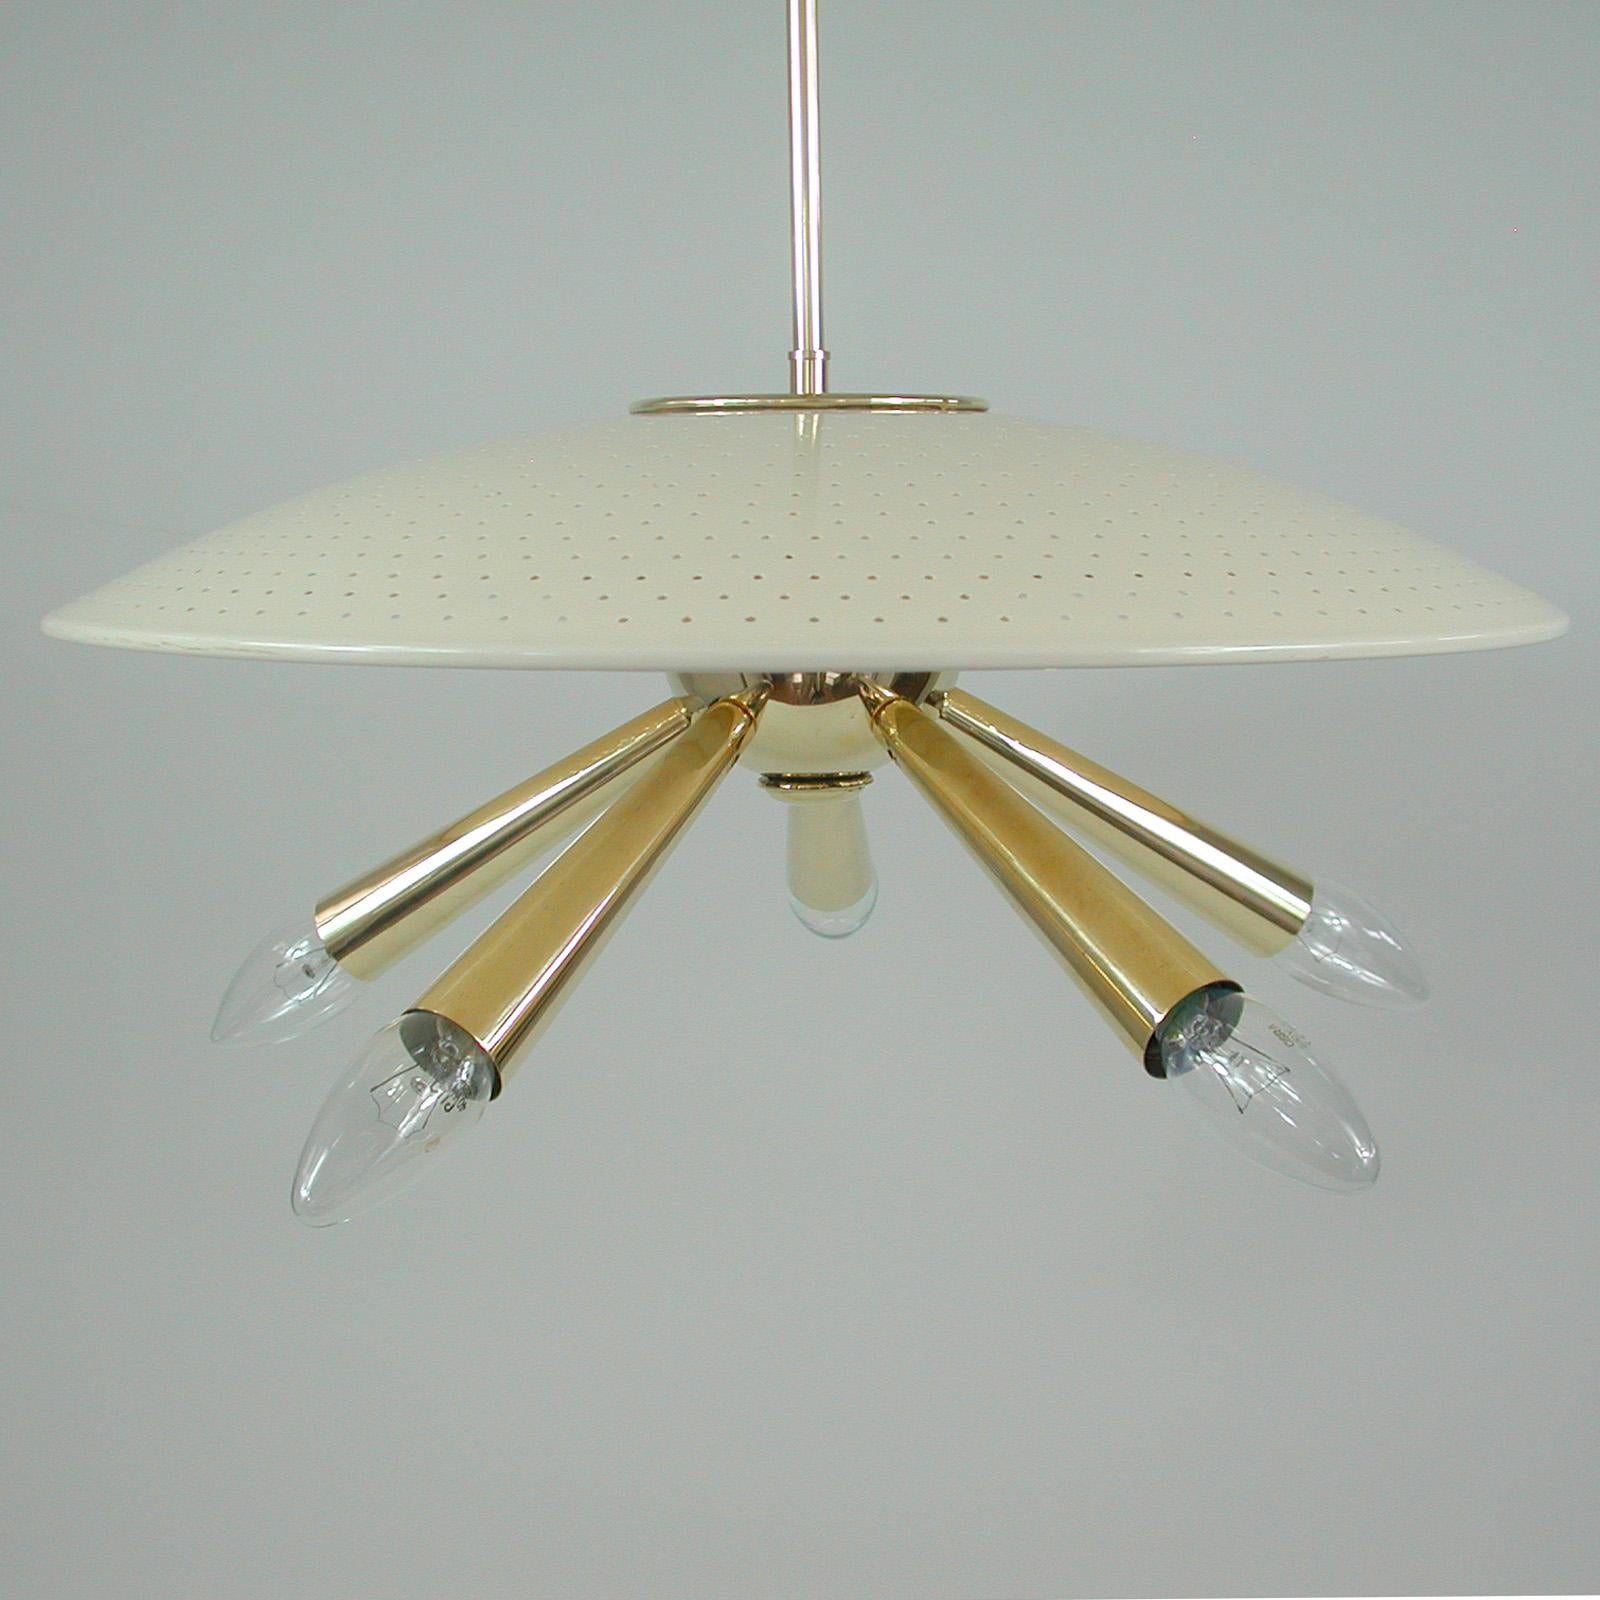 Midcentury Brass Dome 5 Light Pendant, Italy Early 1950s For Sale 3